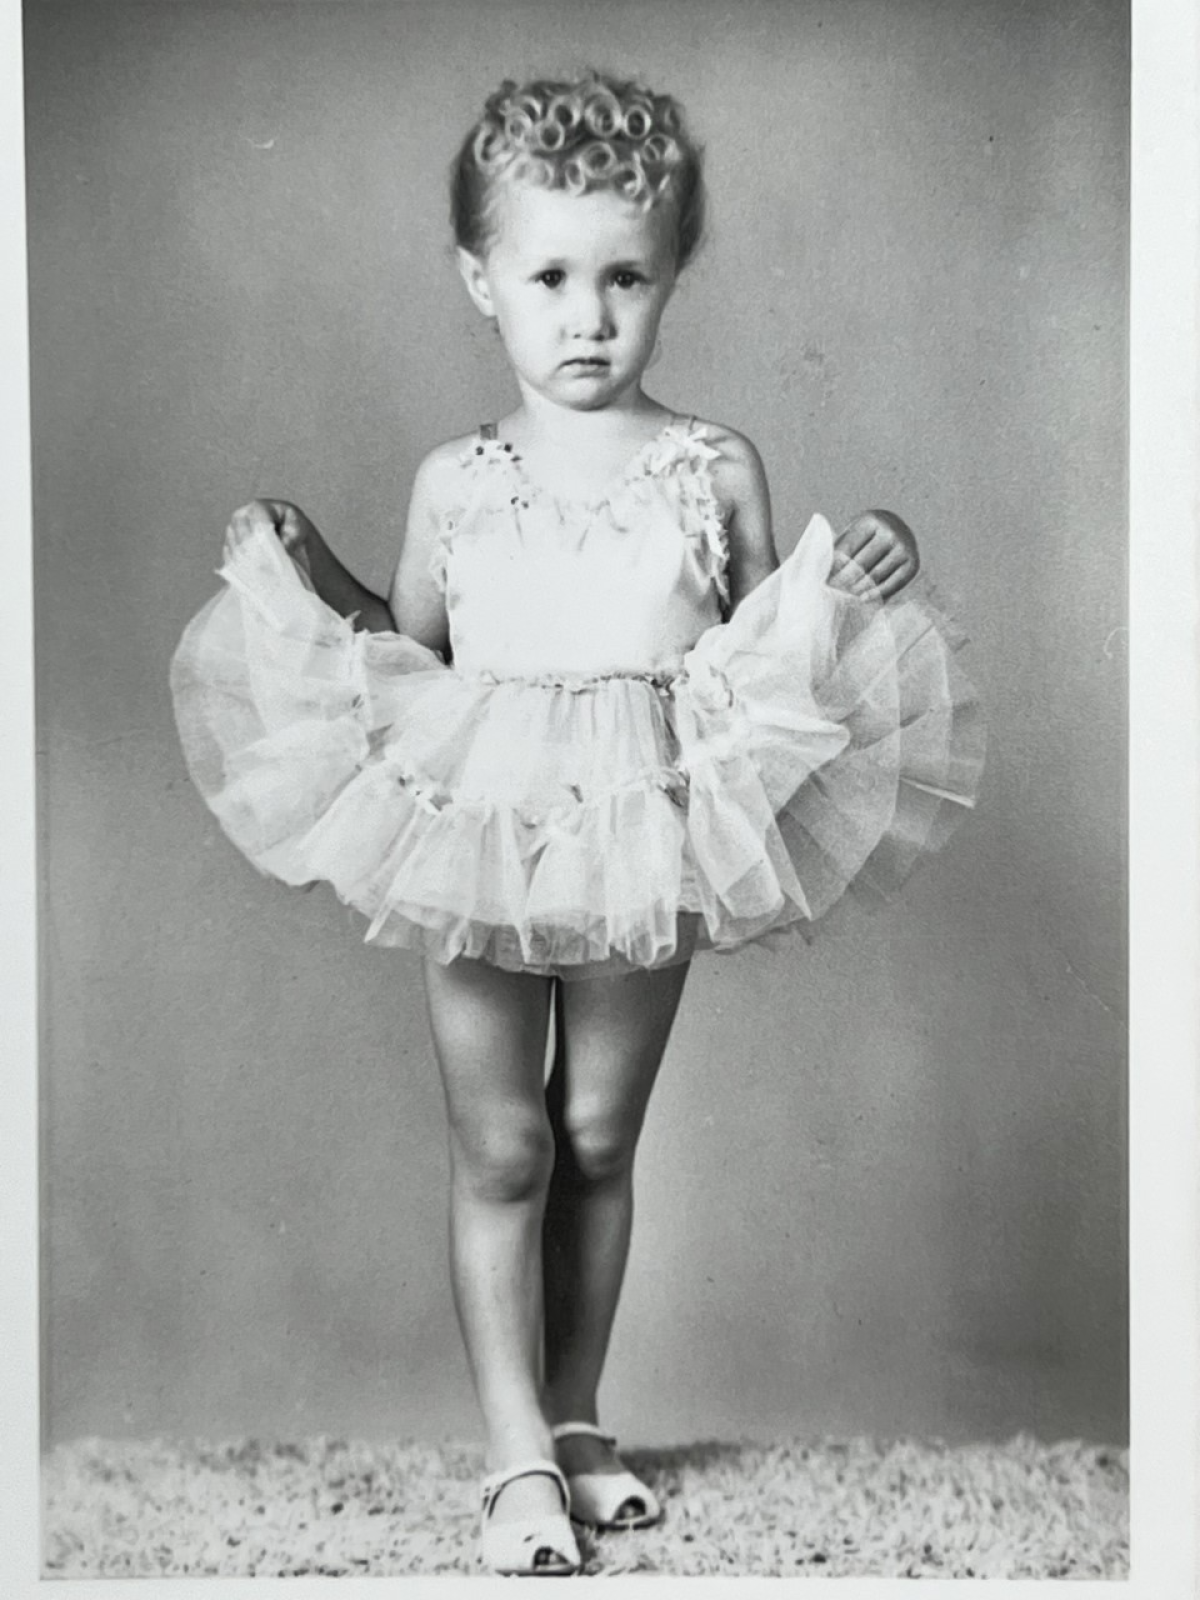 Cheri Pogeler when she was a child at the start of her dancing career.